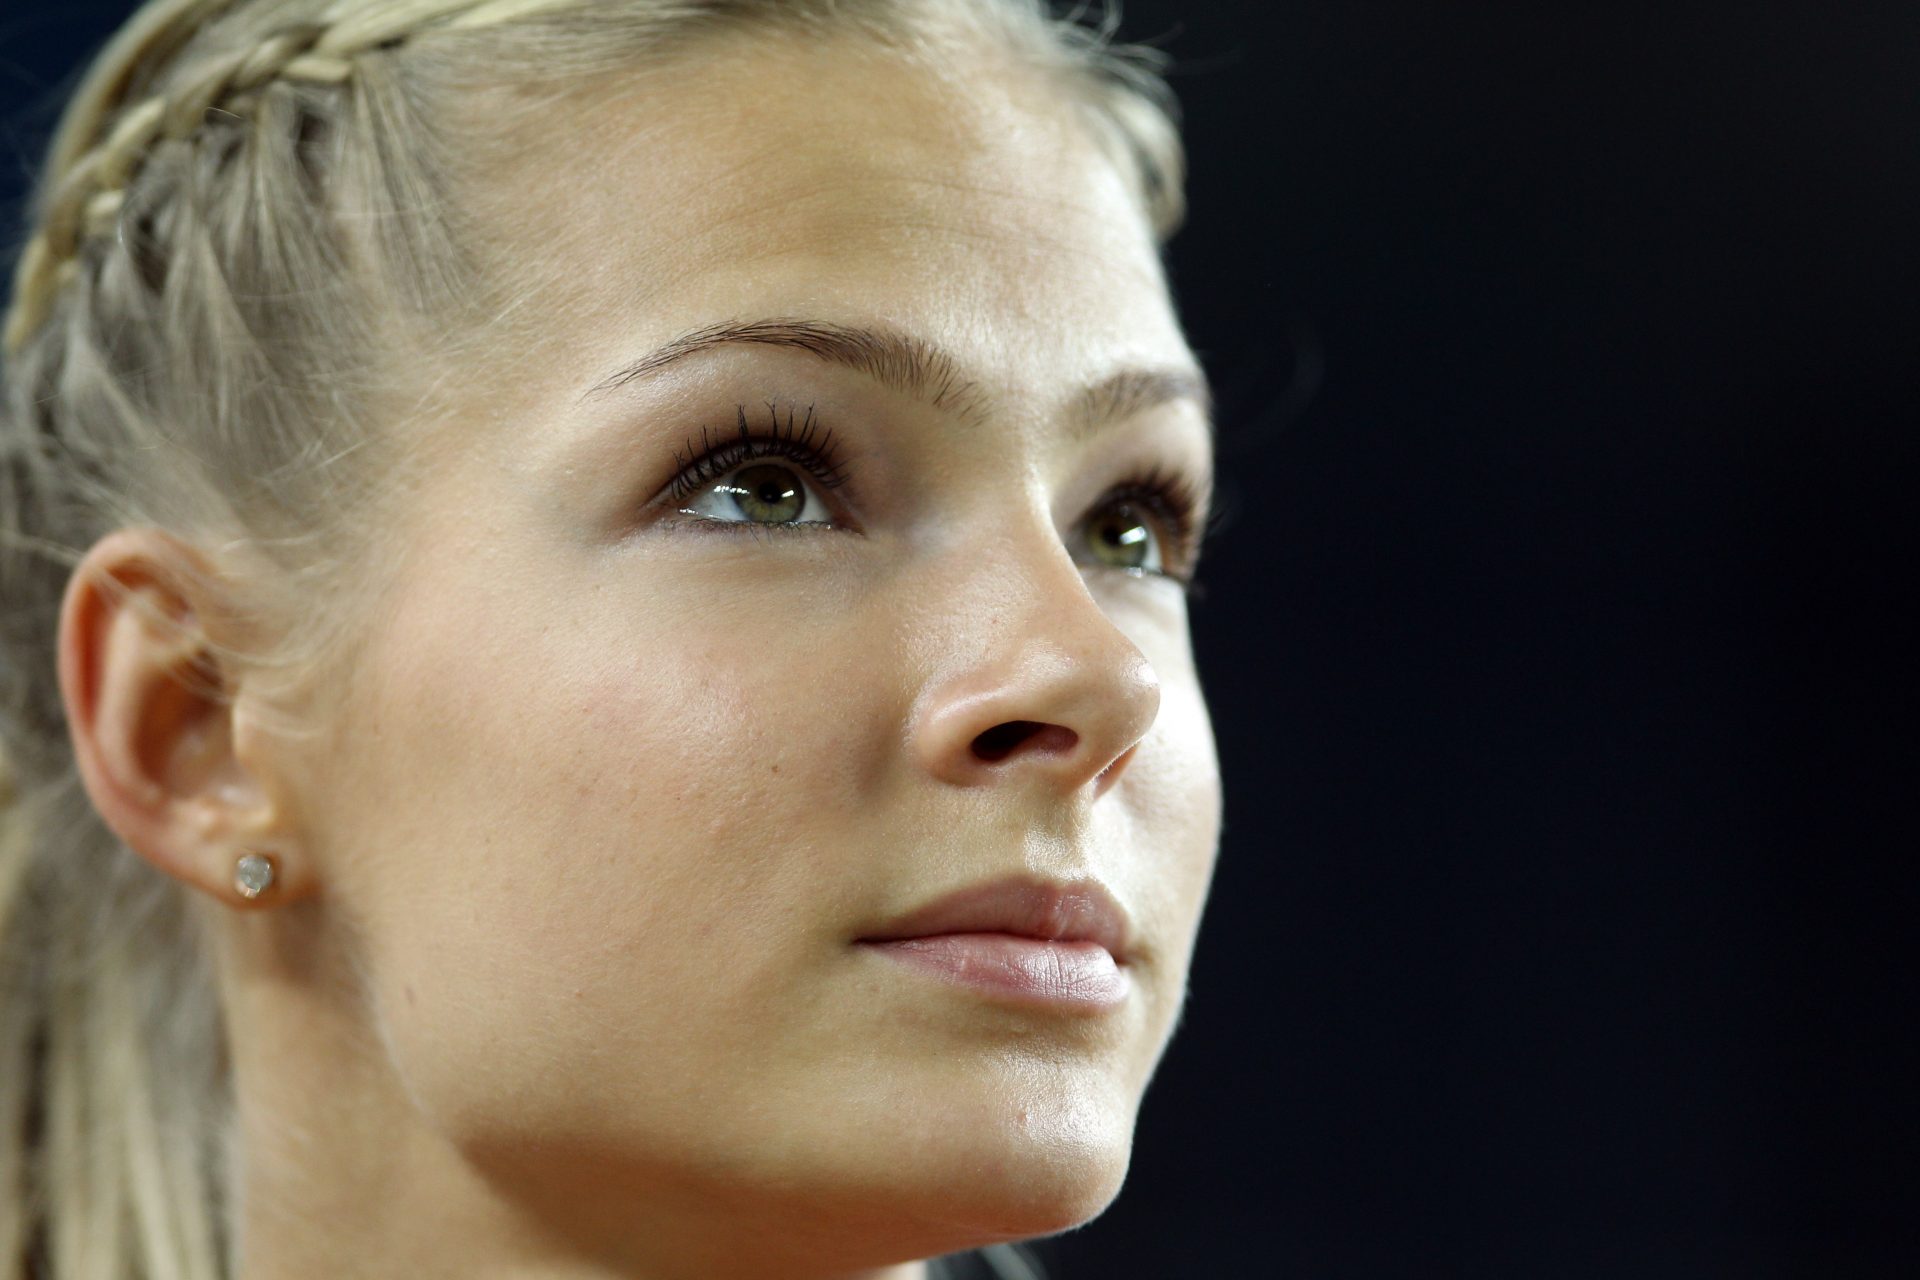 Darya Klishina and the $200k a month 'job offer' that shocked the world